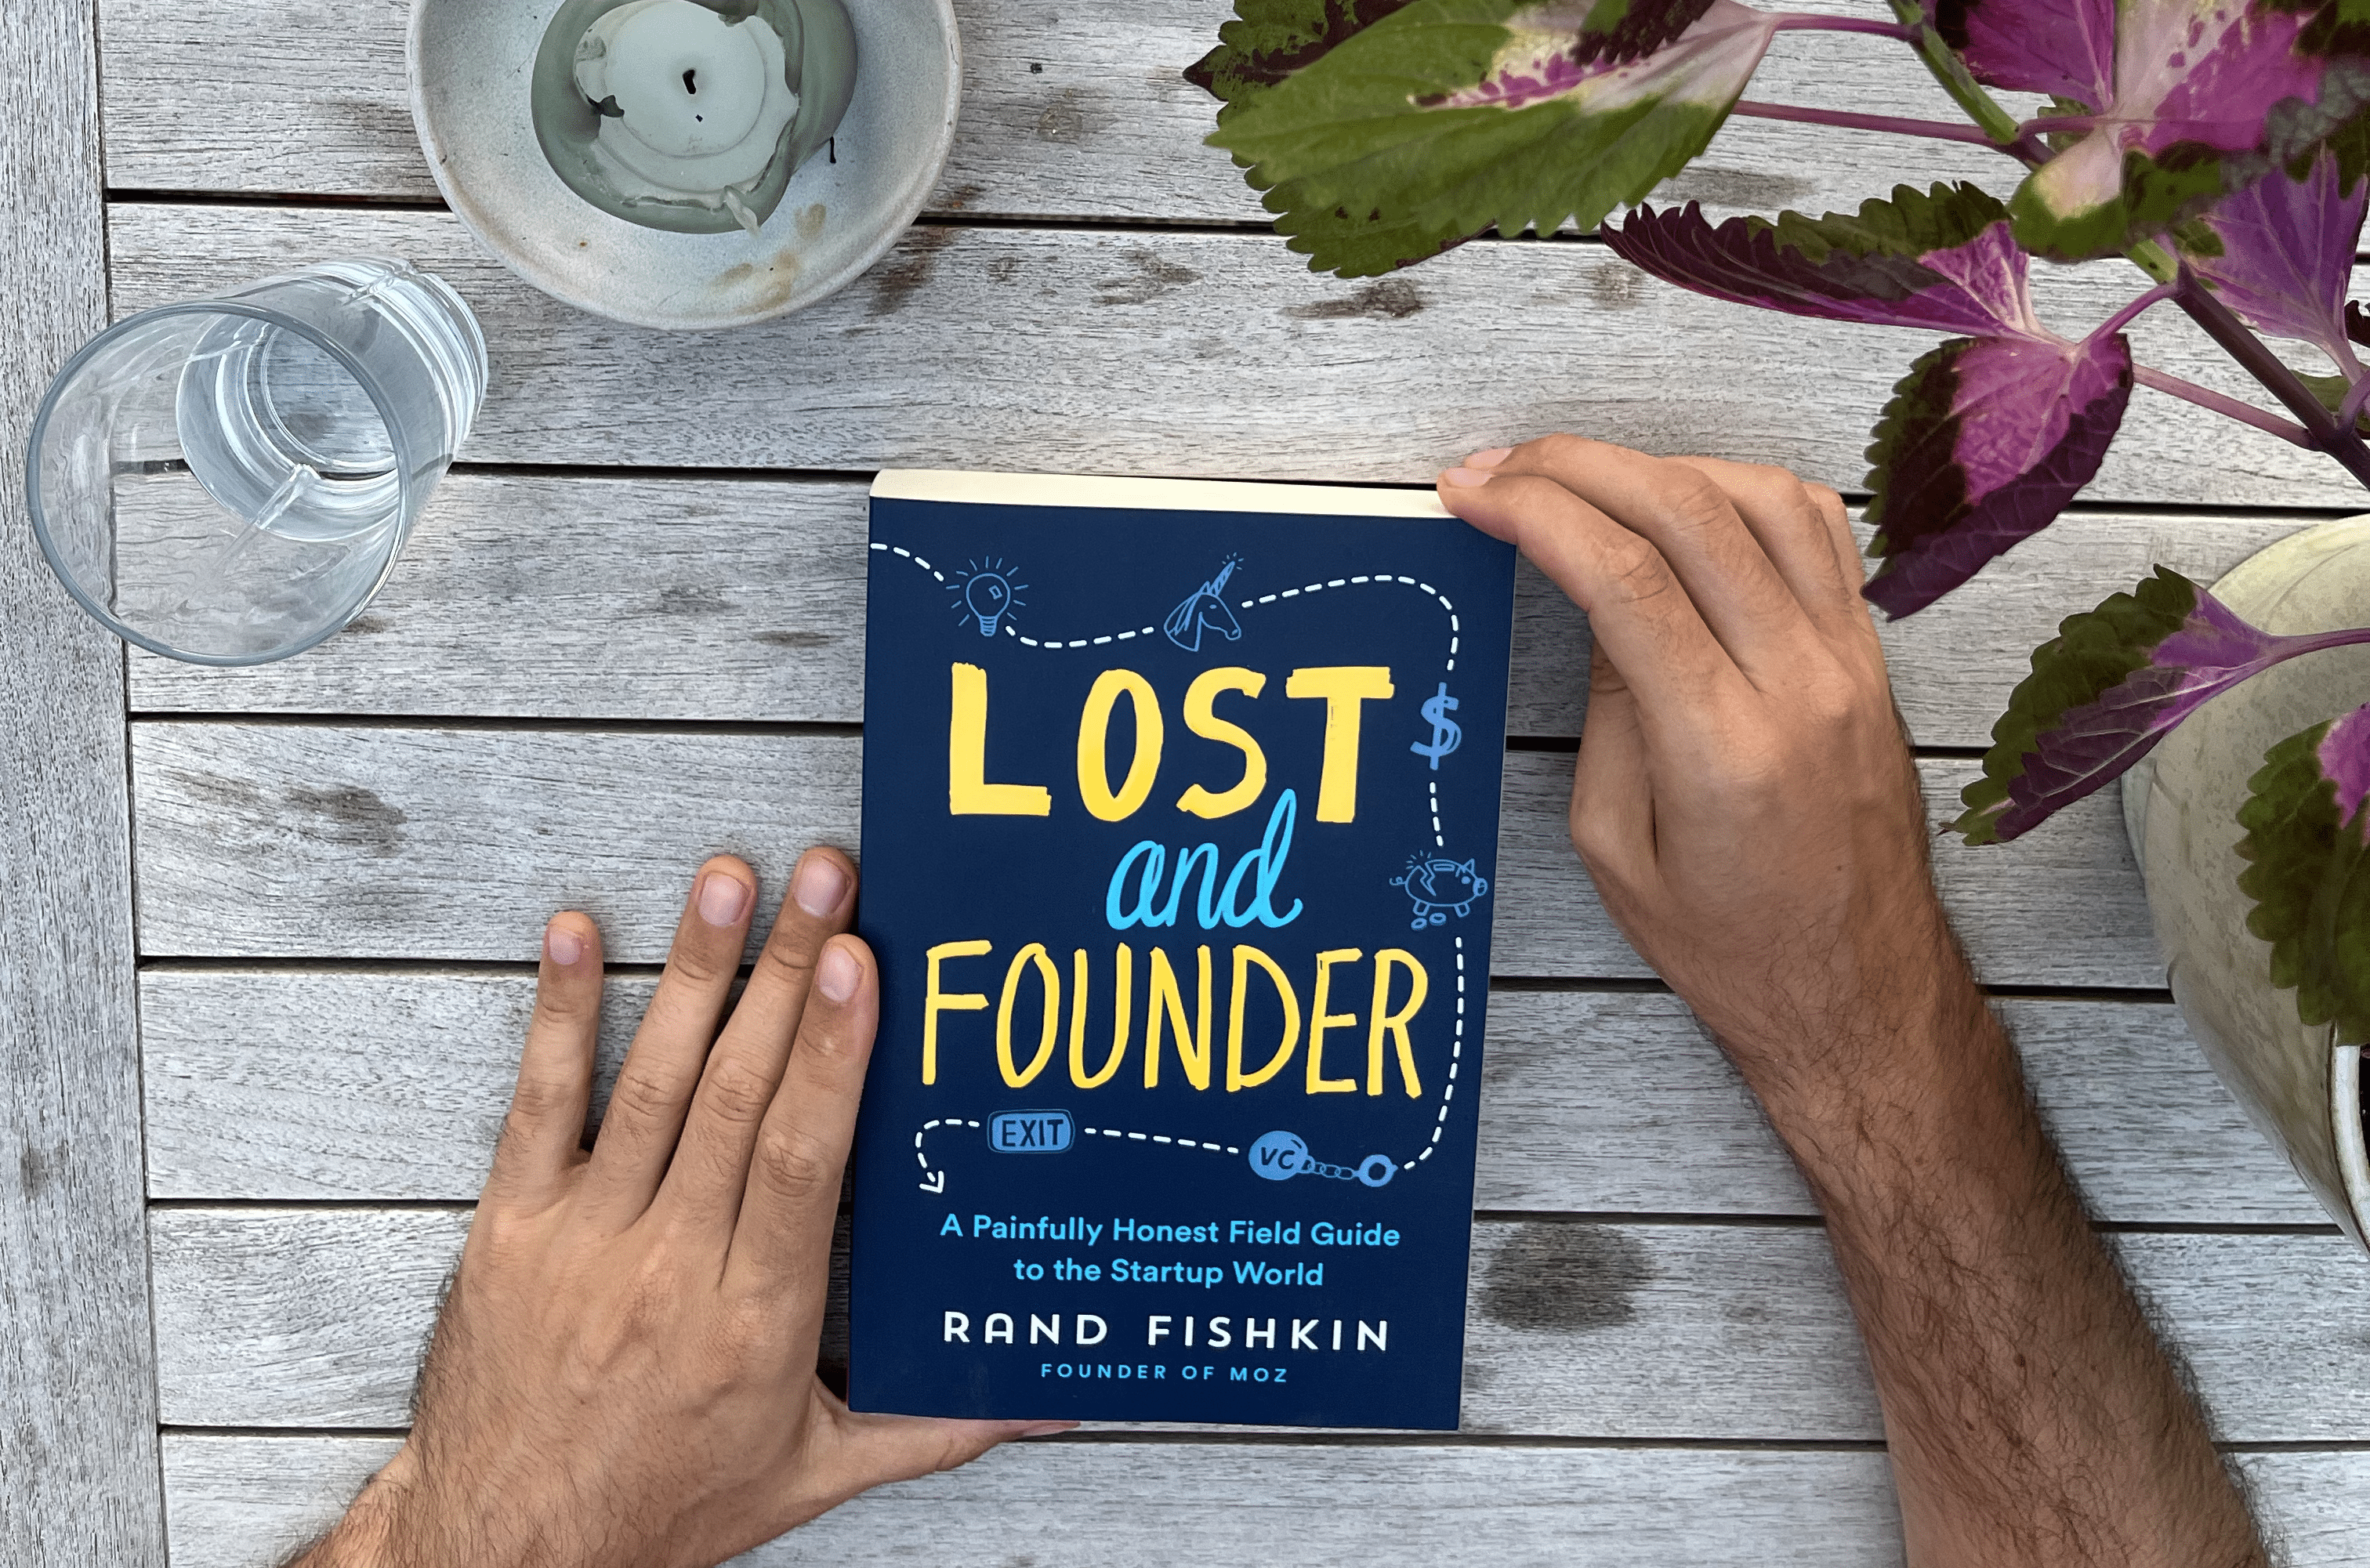 Summary: Lost and Founder: A Painfully Honest Field Guide to the Startup World by Rand Fishkin